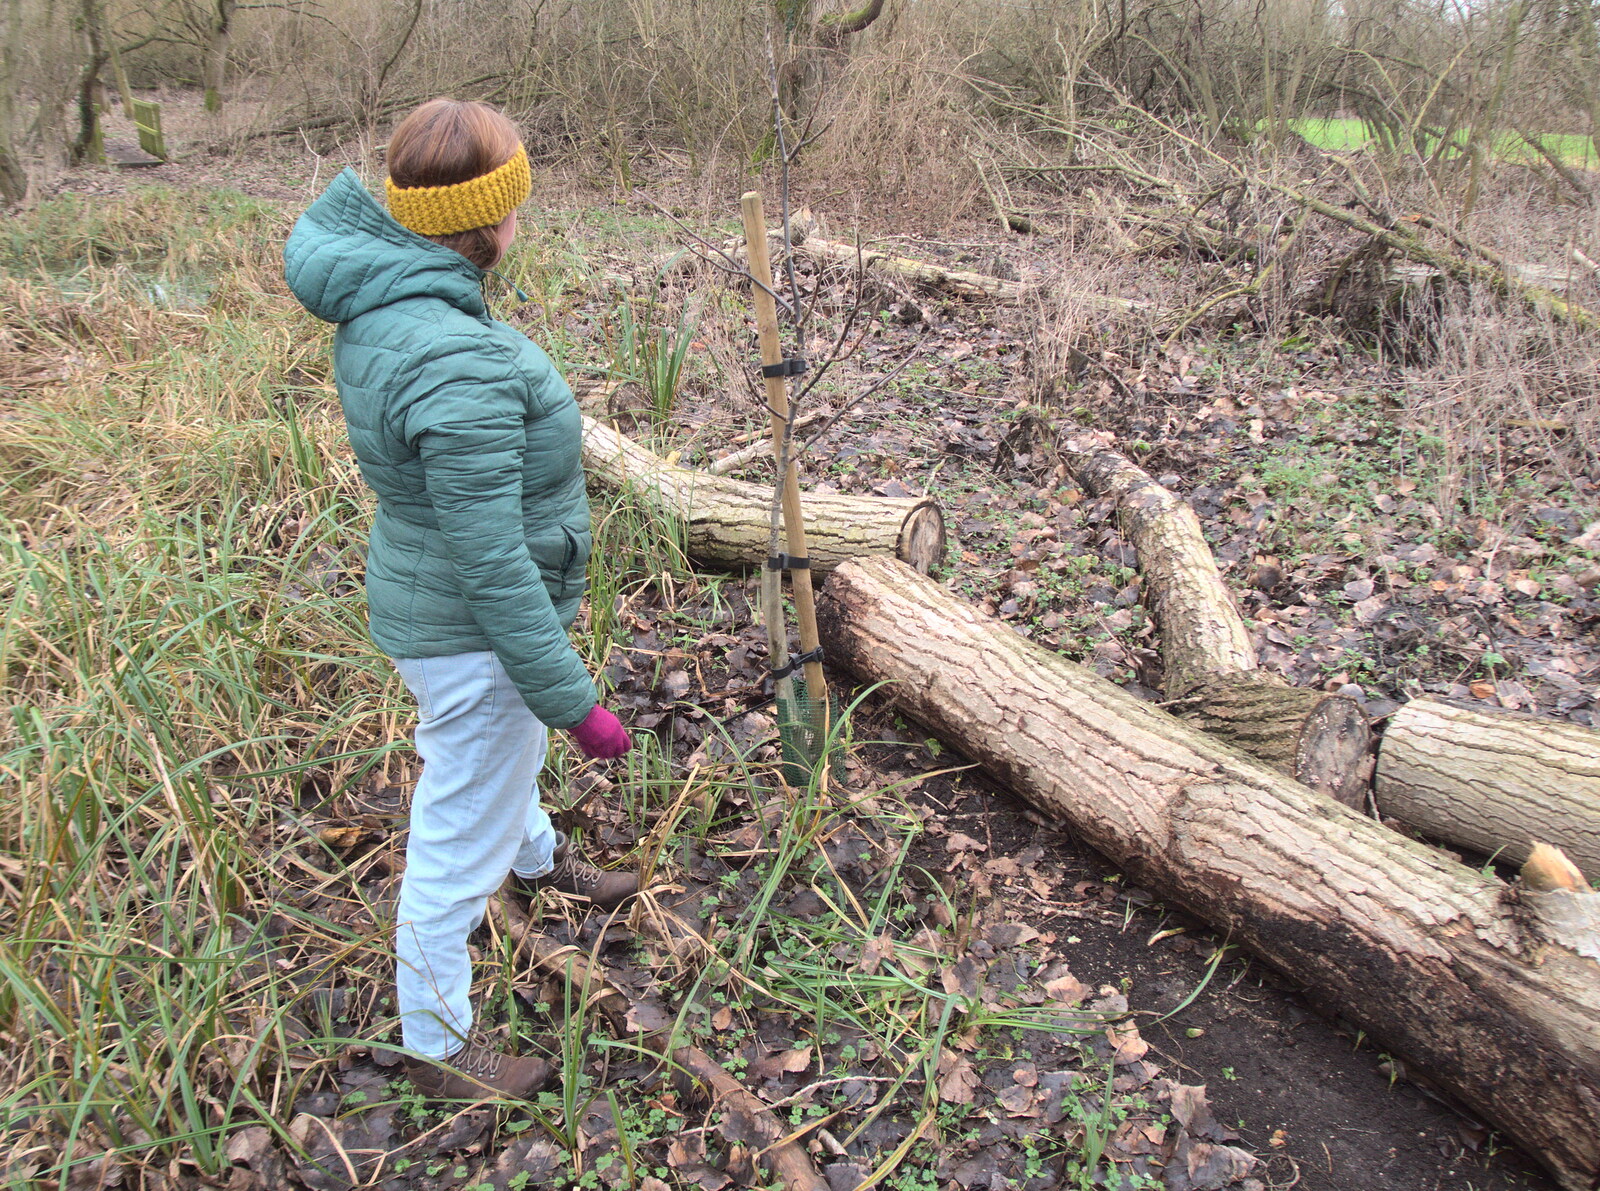 A Wander around Fair Green, Diss, Norfolk - 11th January 2023: Anita-Tree was only centimetres from being crushed